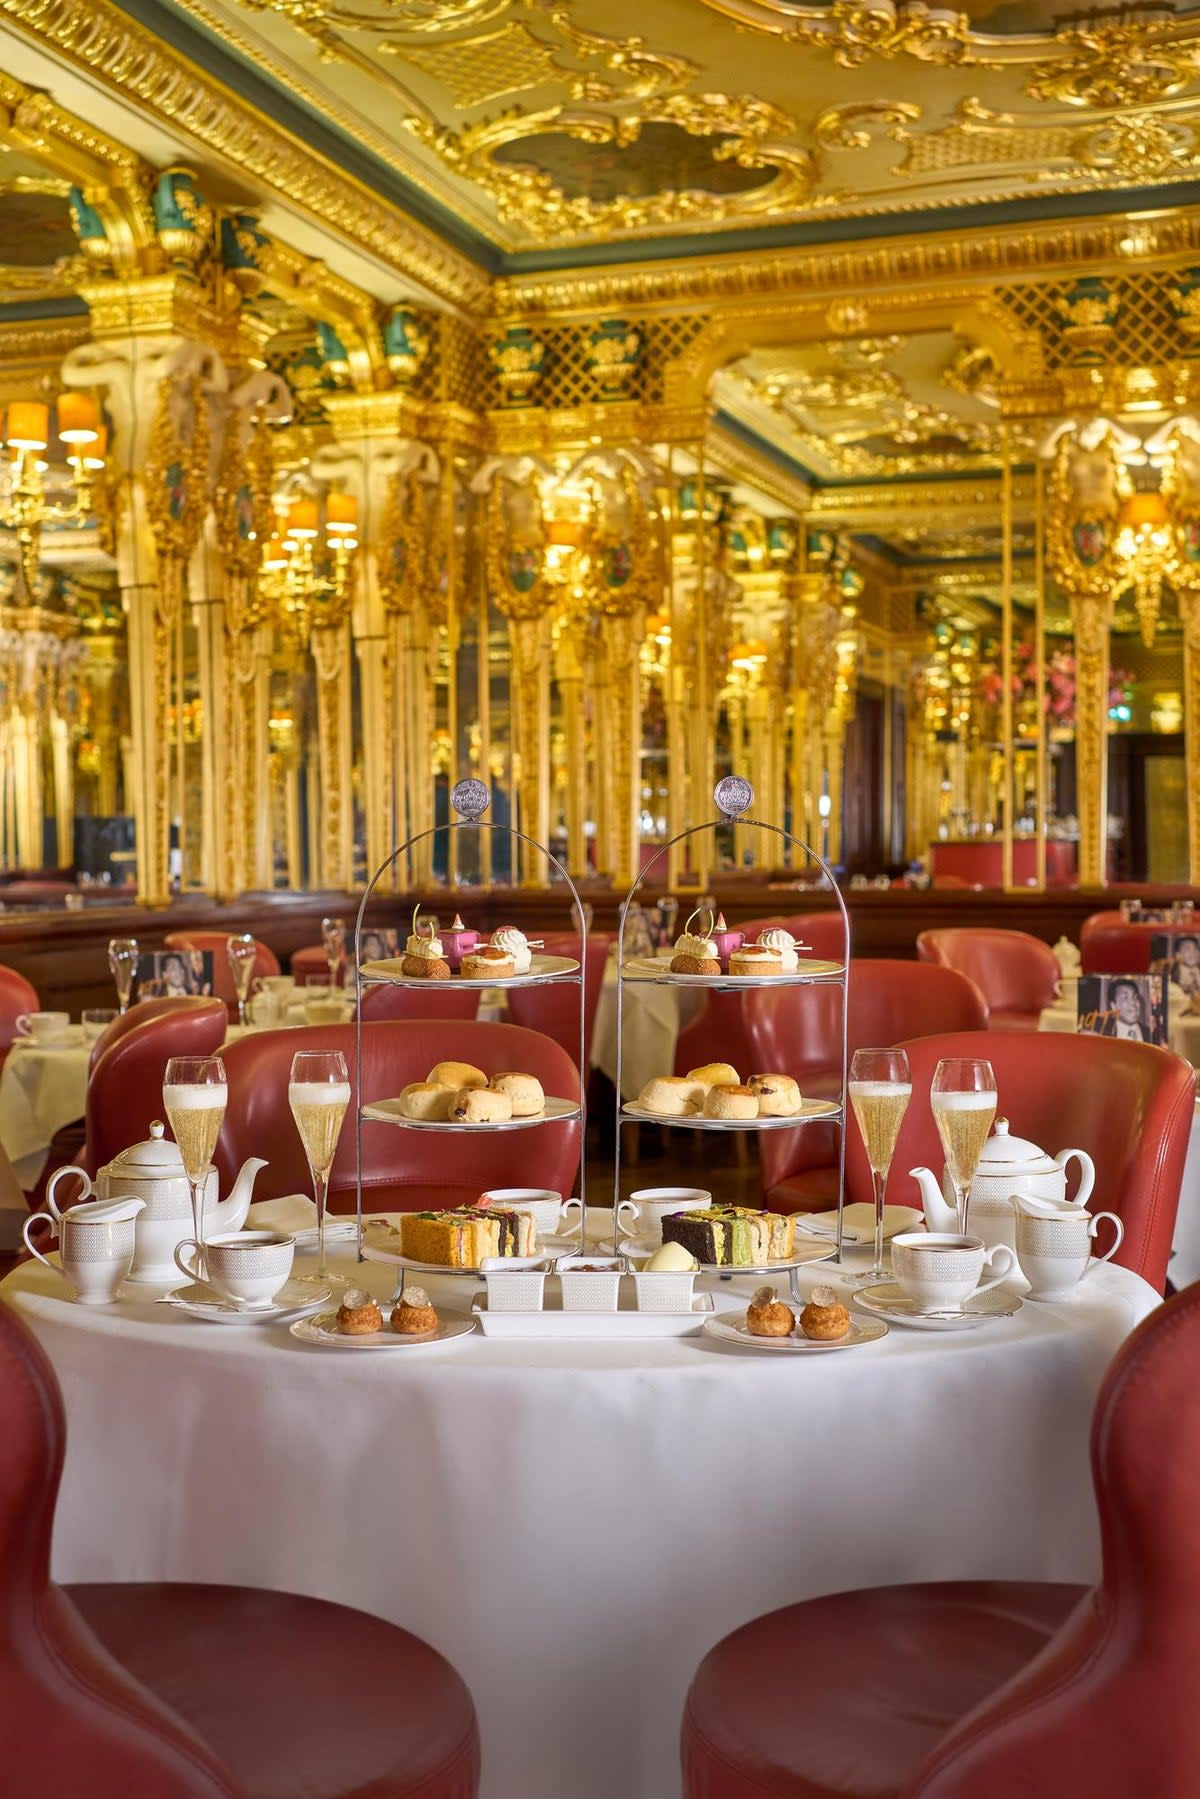 The Kings Charles III experience costs a slightly less extravagant £2,625 and includes champagne afternoon tea (Giles Christopher/ Hotel Café Royal)